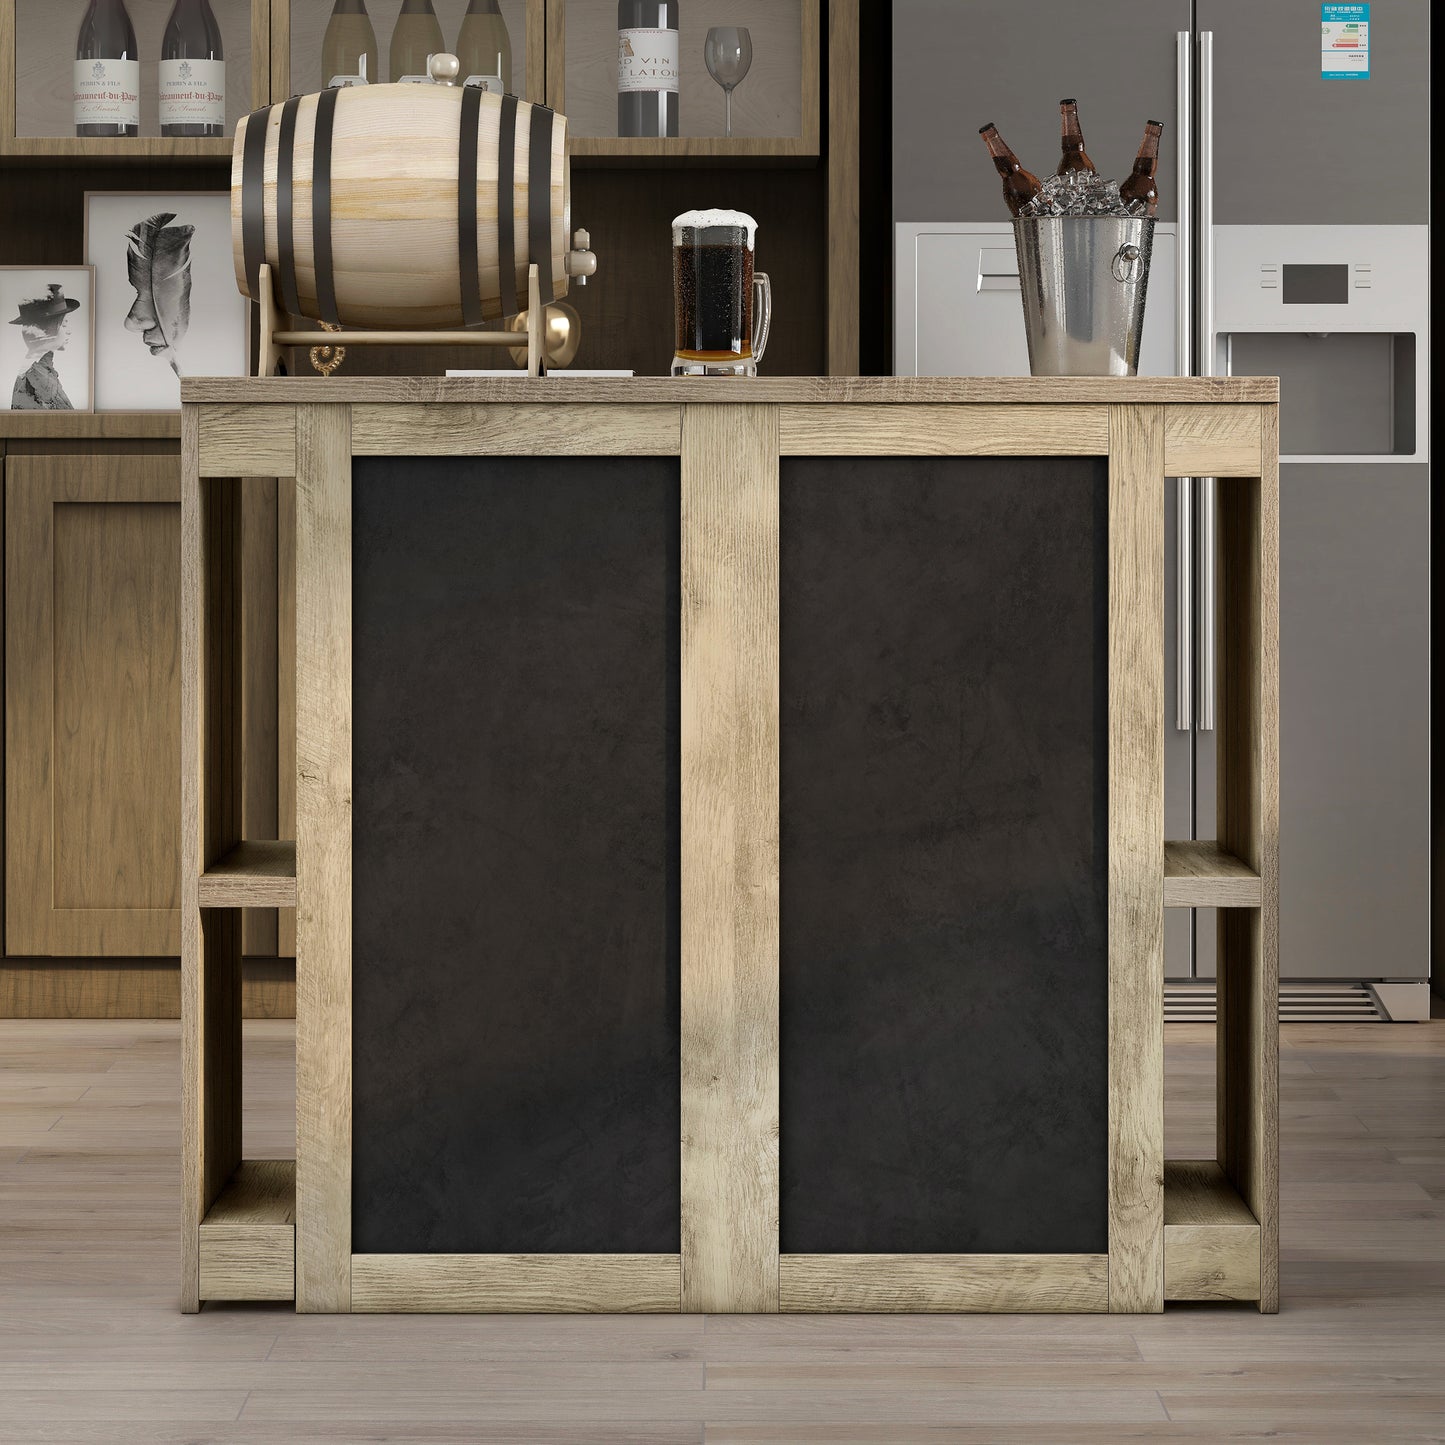 Front-facing rustic weathered oak nine-shelf home bar with chalkboard doors in a living space with accessories